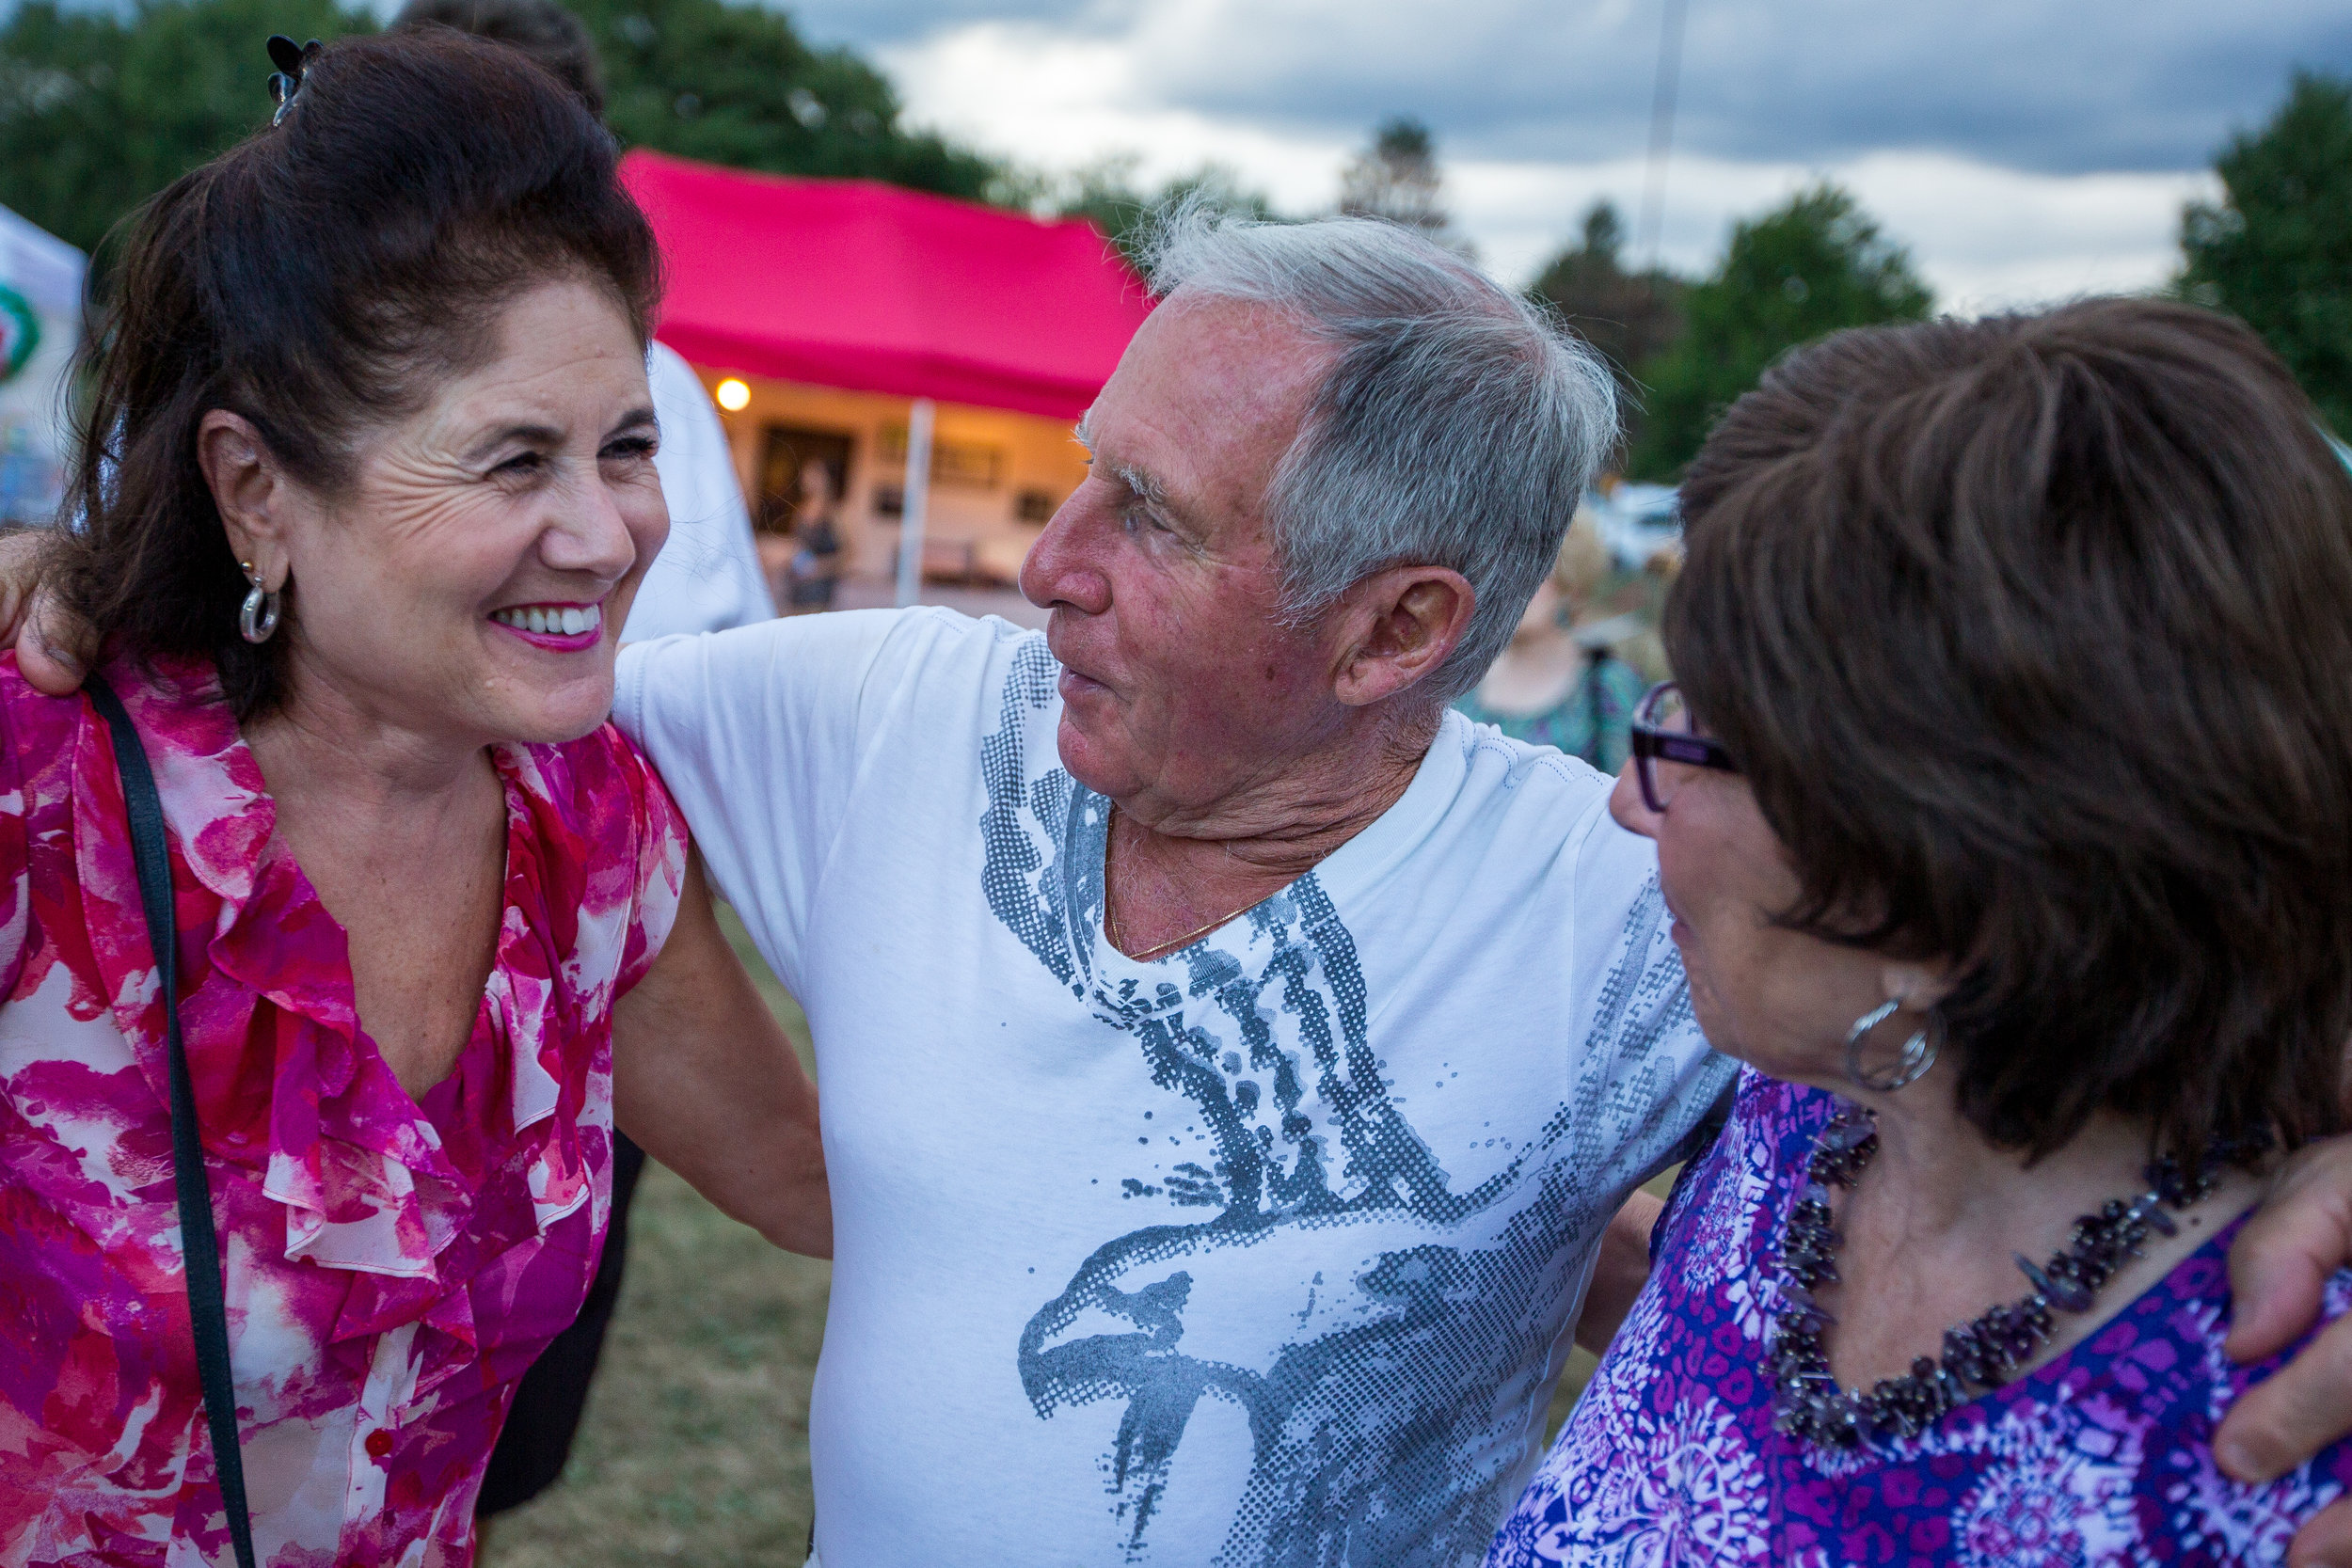  Henry Bufalini, center, hugs Carol Fox, left and Jeanne Smith at the 91st San Rocco Festa in Aliquippa on Saturday afternoon. The festival, which originated in the town of Patrica, Italy, took place over three days and featured live music, vendors, 